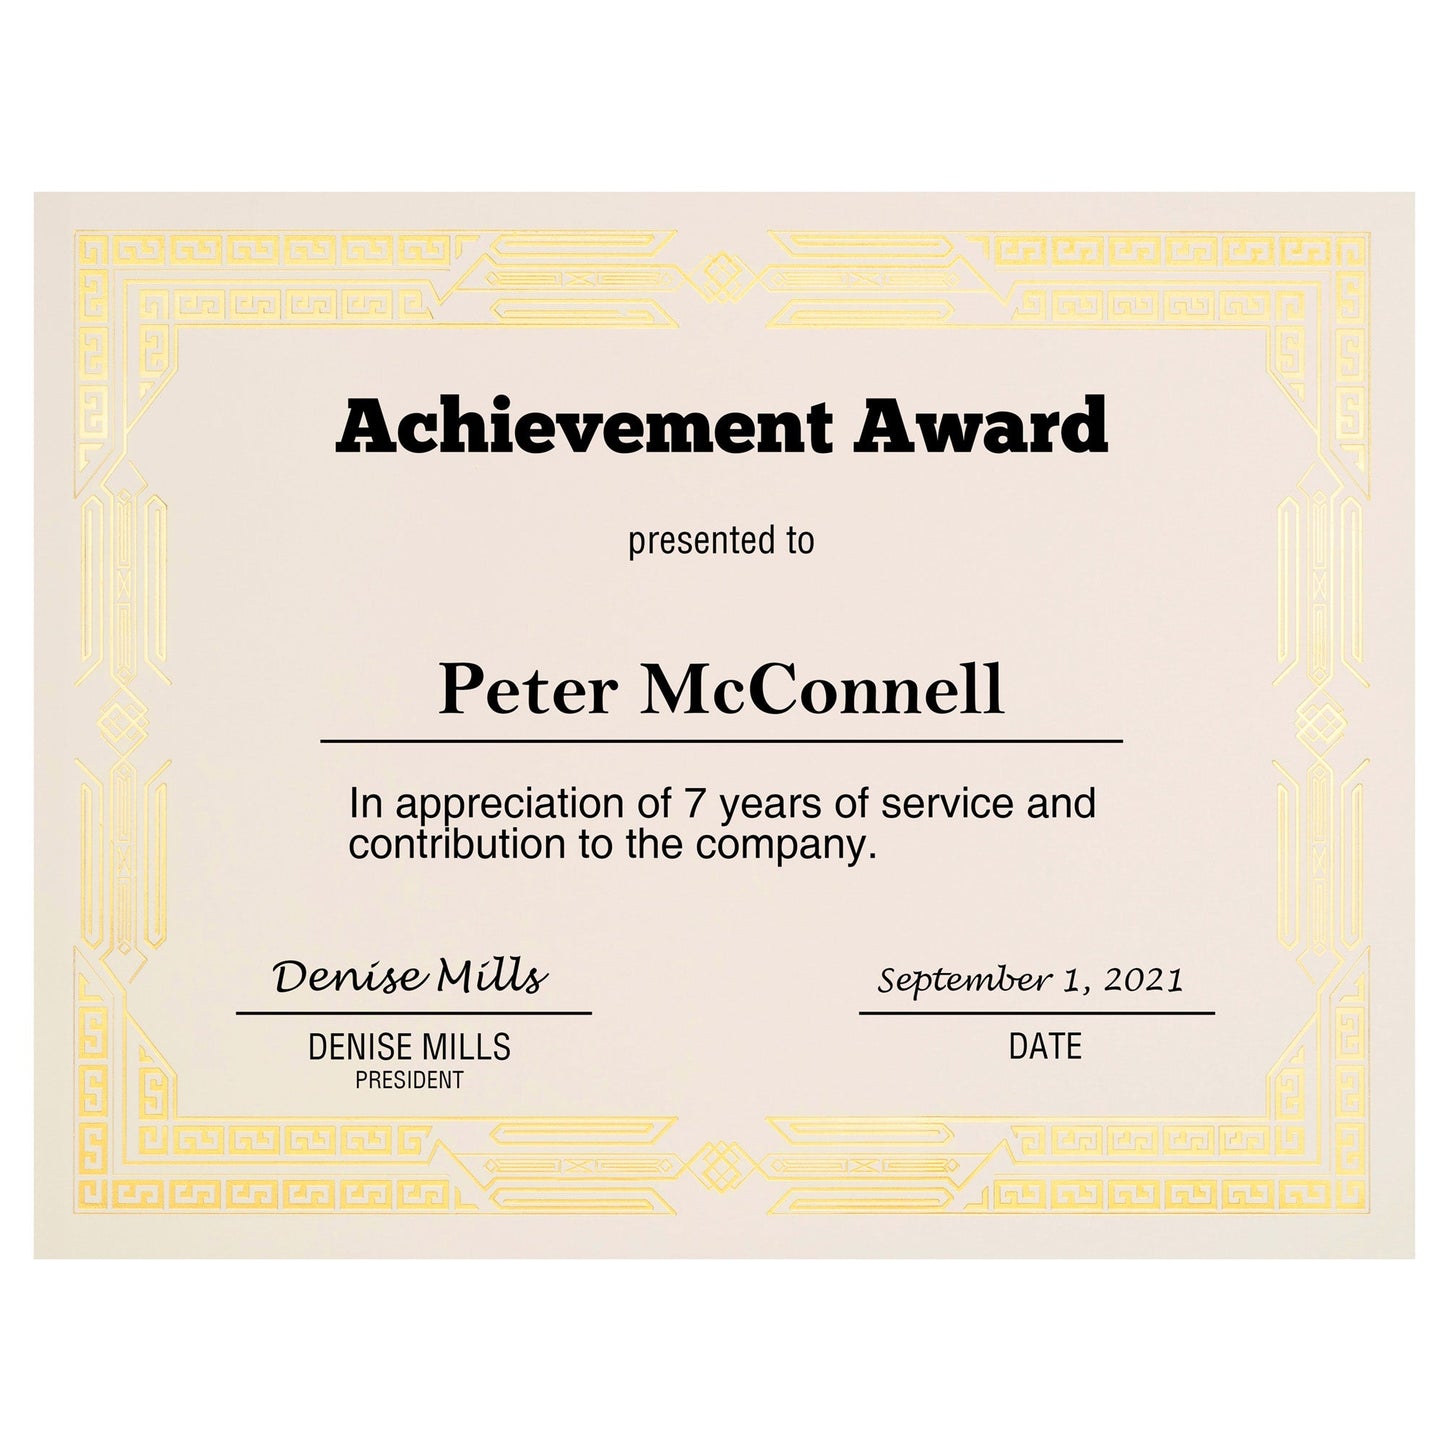 St. James® Premium Weight Certificates, Jazz Design, Gold Foil, Ivory, 65 lb, 8.5 x 11", Pack of 15